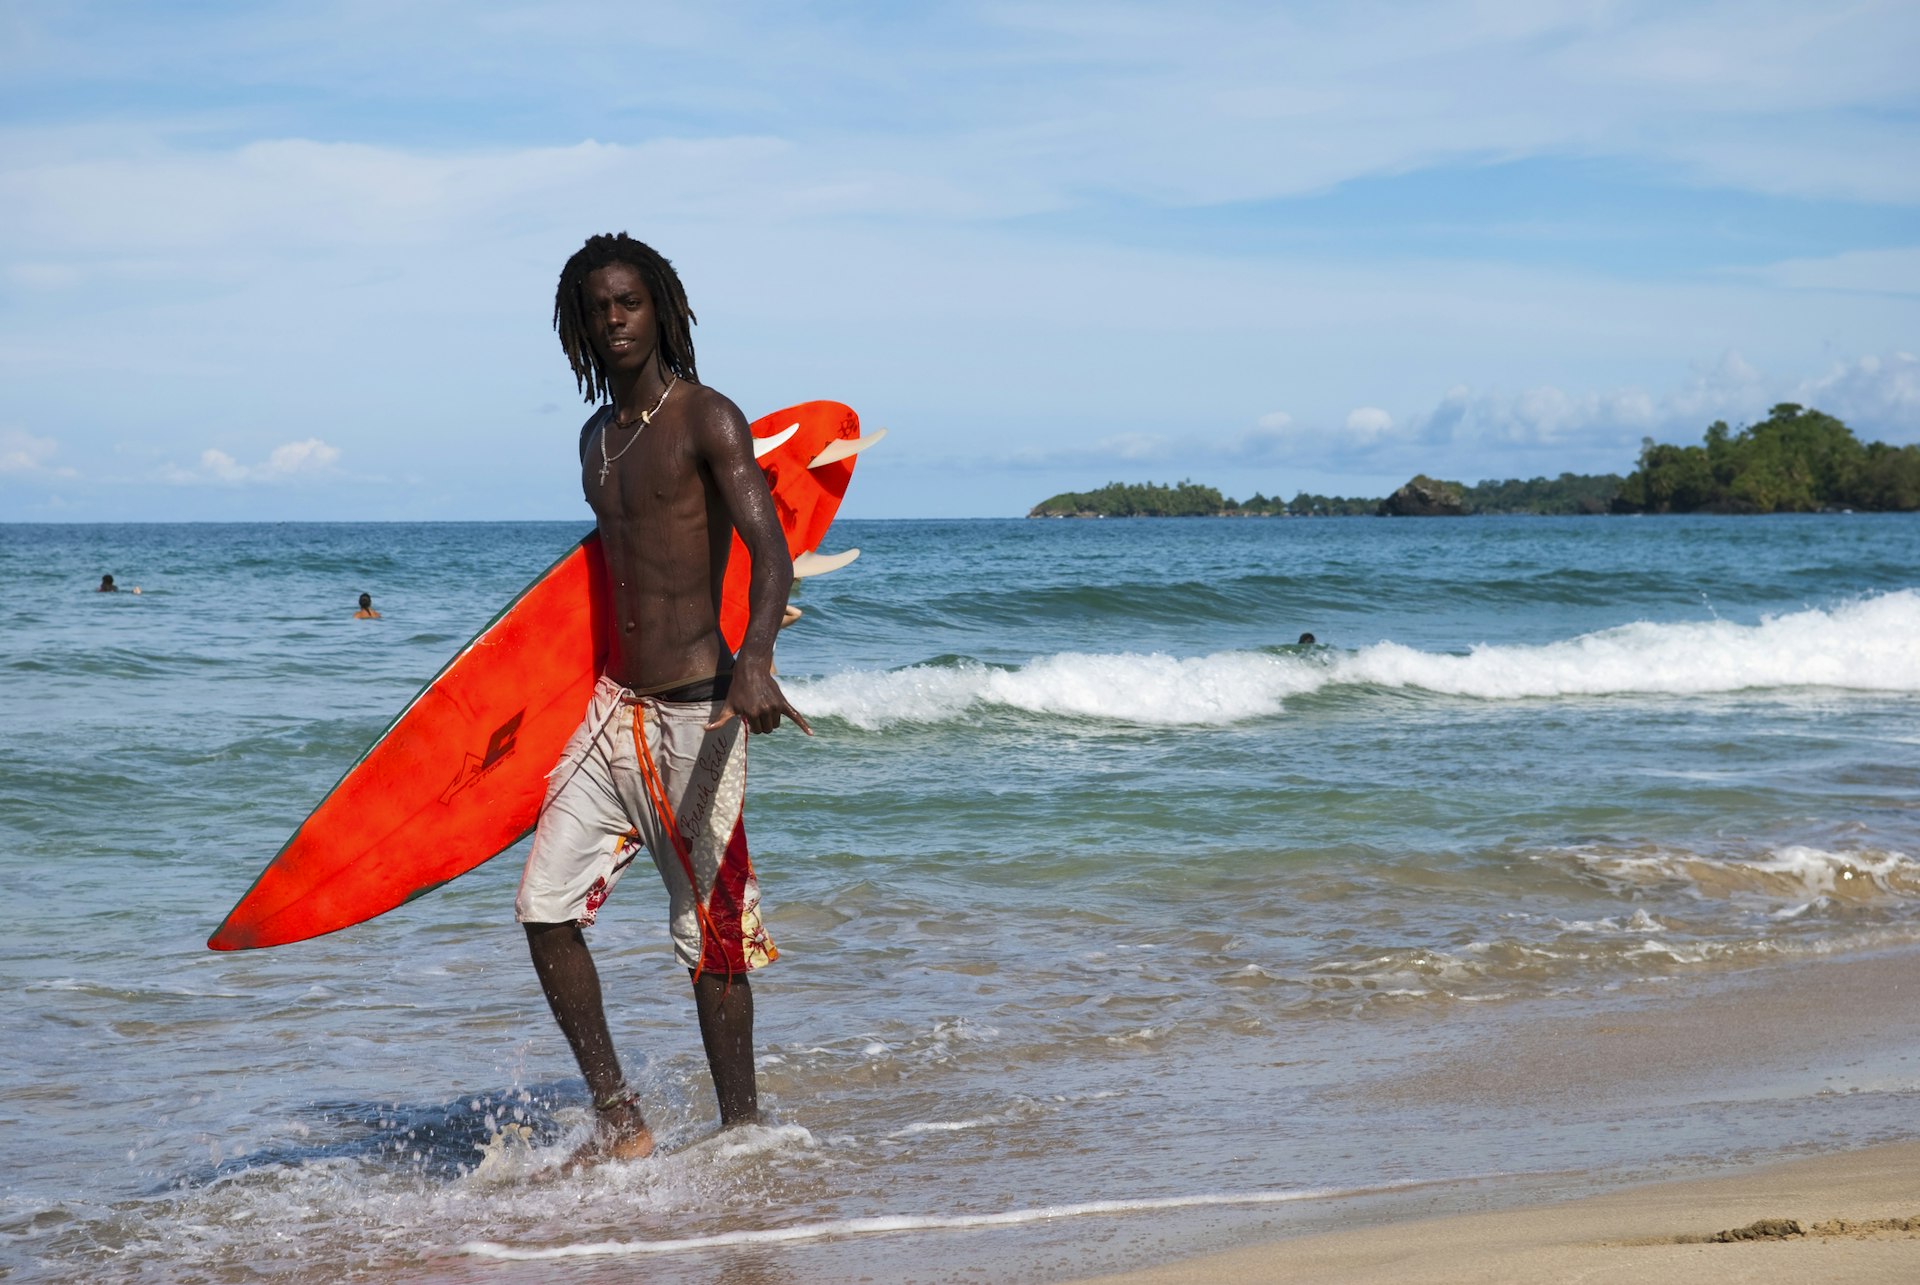 A Panamanian surfer with dread locks walks with his surfboard at Wizard Beach, located on Isla Bastimentos in the Bocas del Toro Archipelago. He is giving the hang loose sign with his left hand.